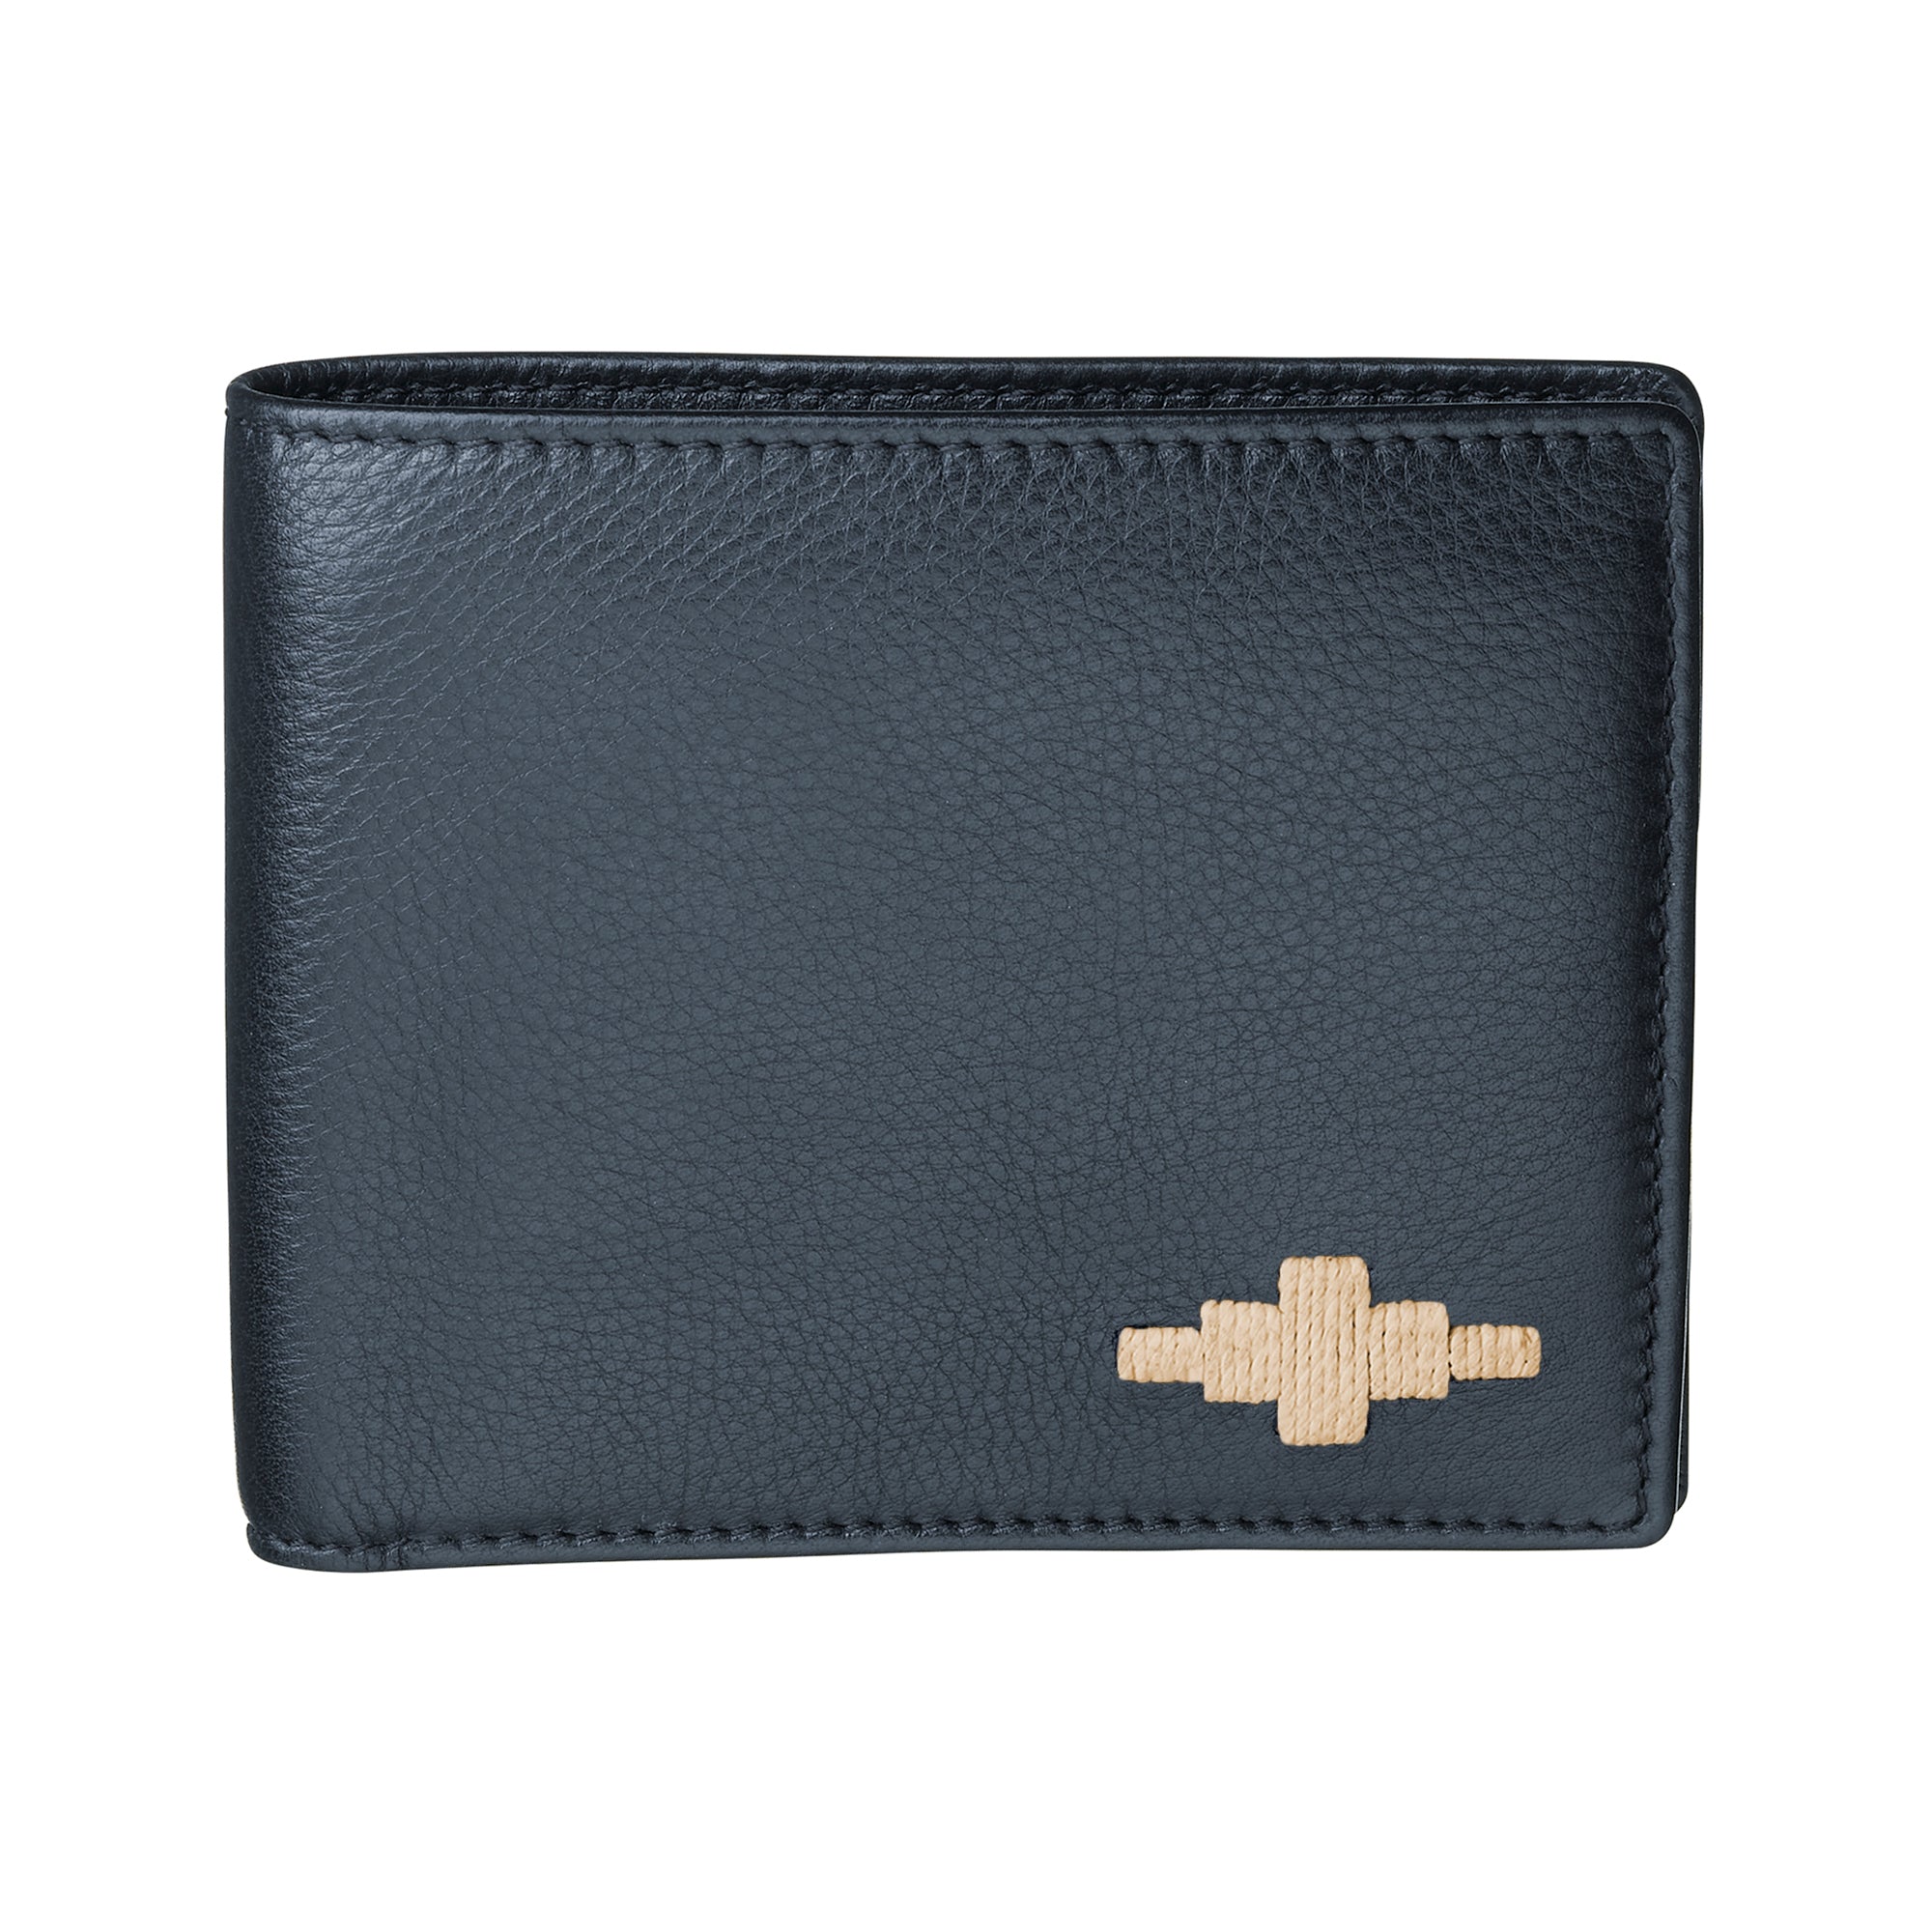 PAMPEANO Moneda Coin Wallet - Navy Leather